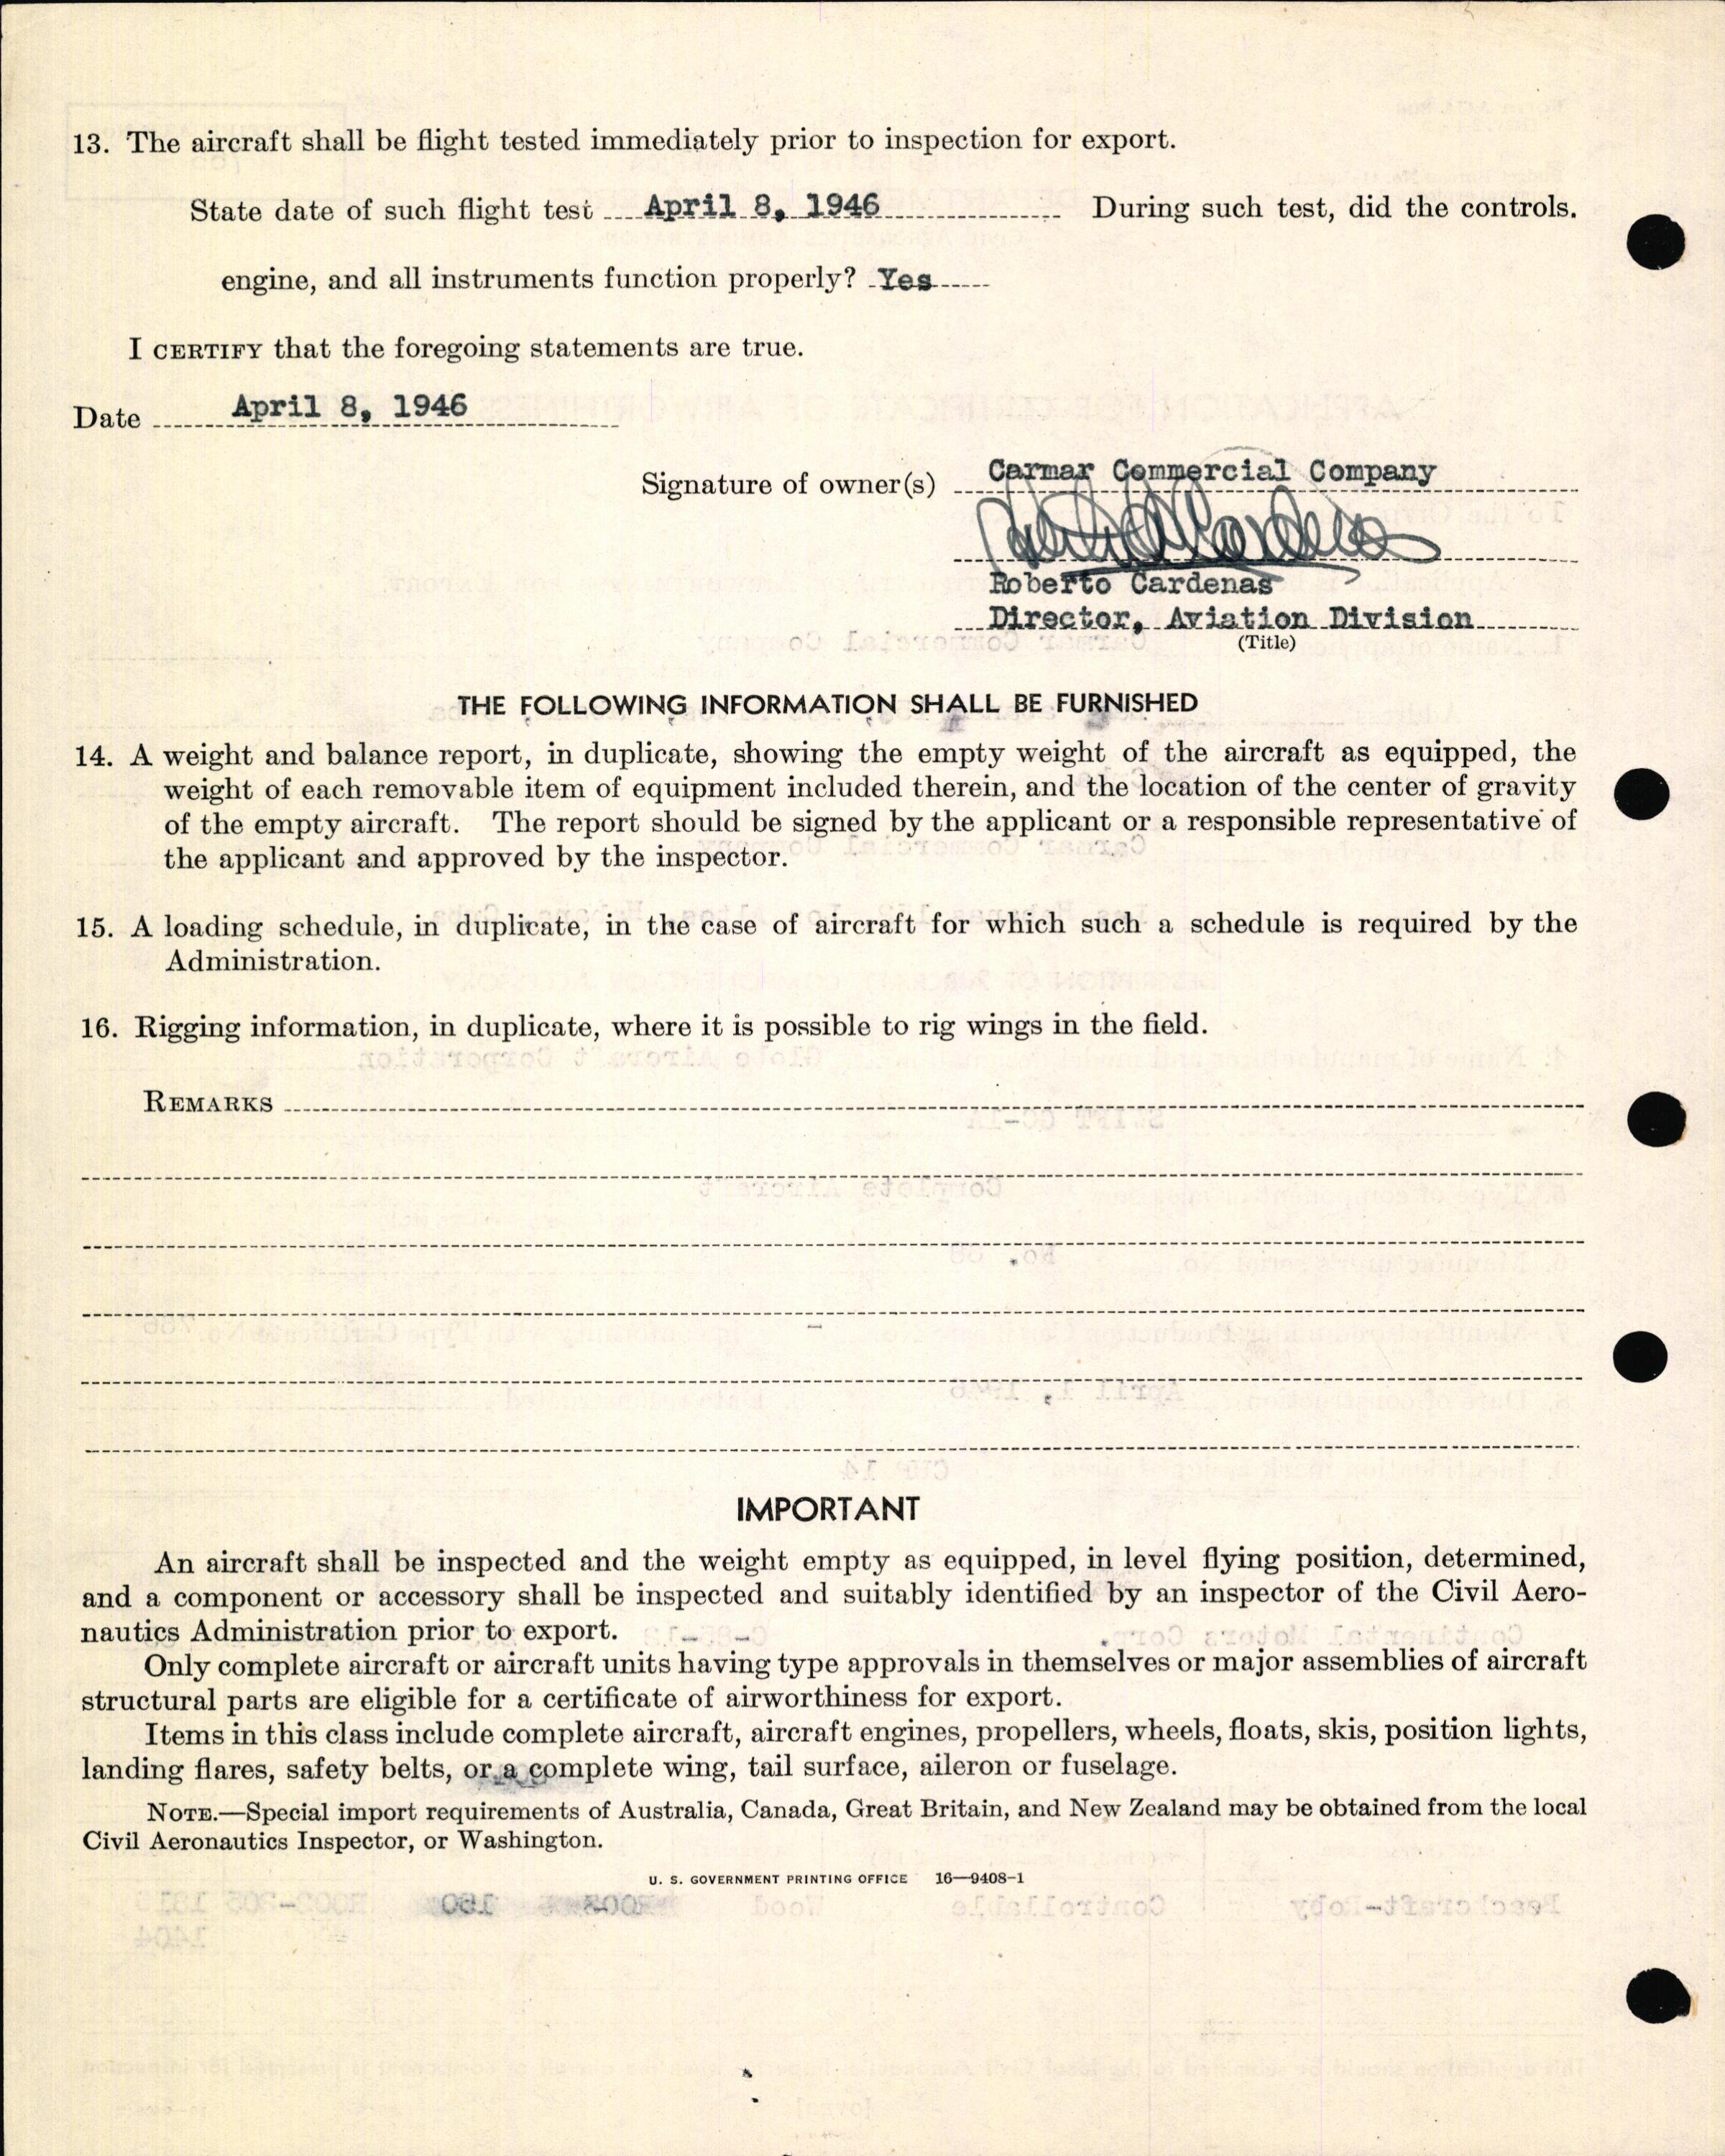 Sample page 6 from AirCorps Library document: Technical Information for Serial Number 68